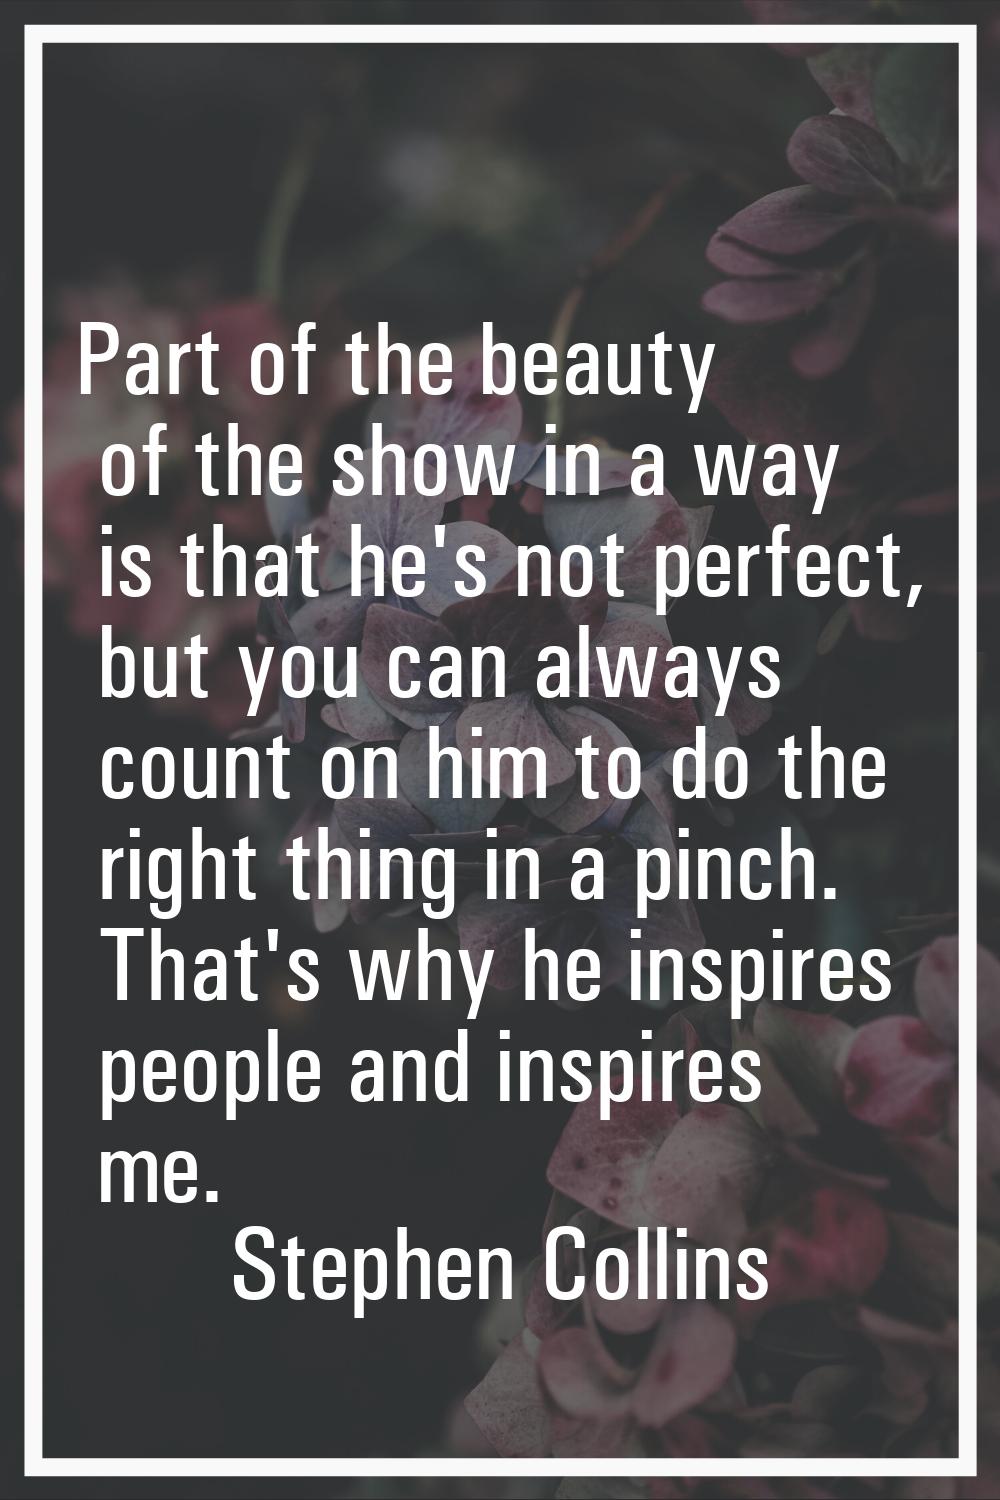 Part of the beauty of the show in a way is that he's not perfect, but you can always count on him t